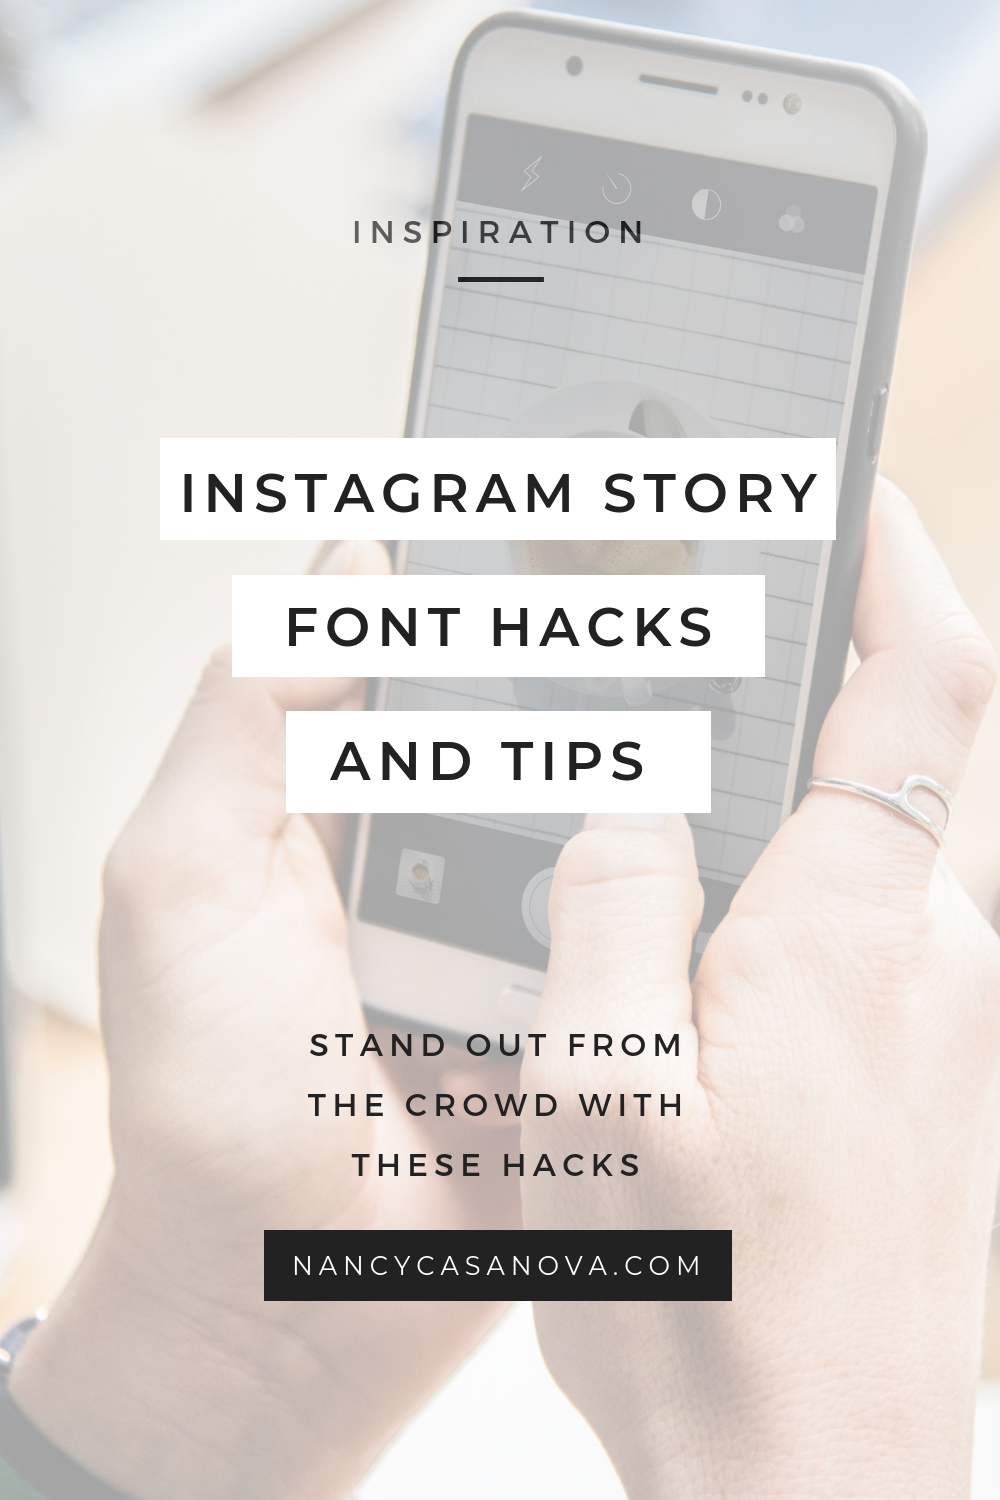 Creative font hacks and tips to make your Instagram Stories stand out from the rest of the crowd.